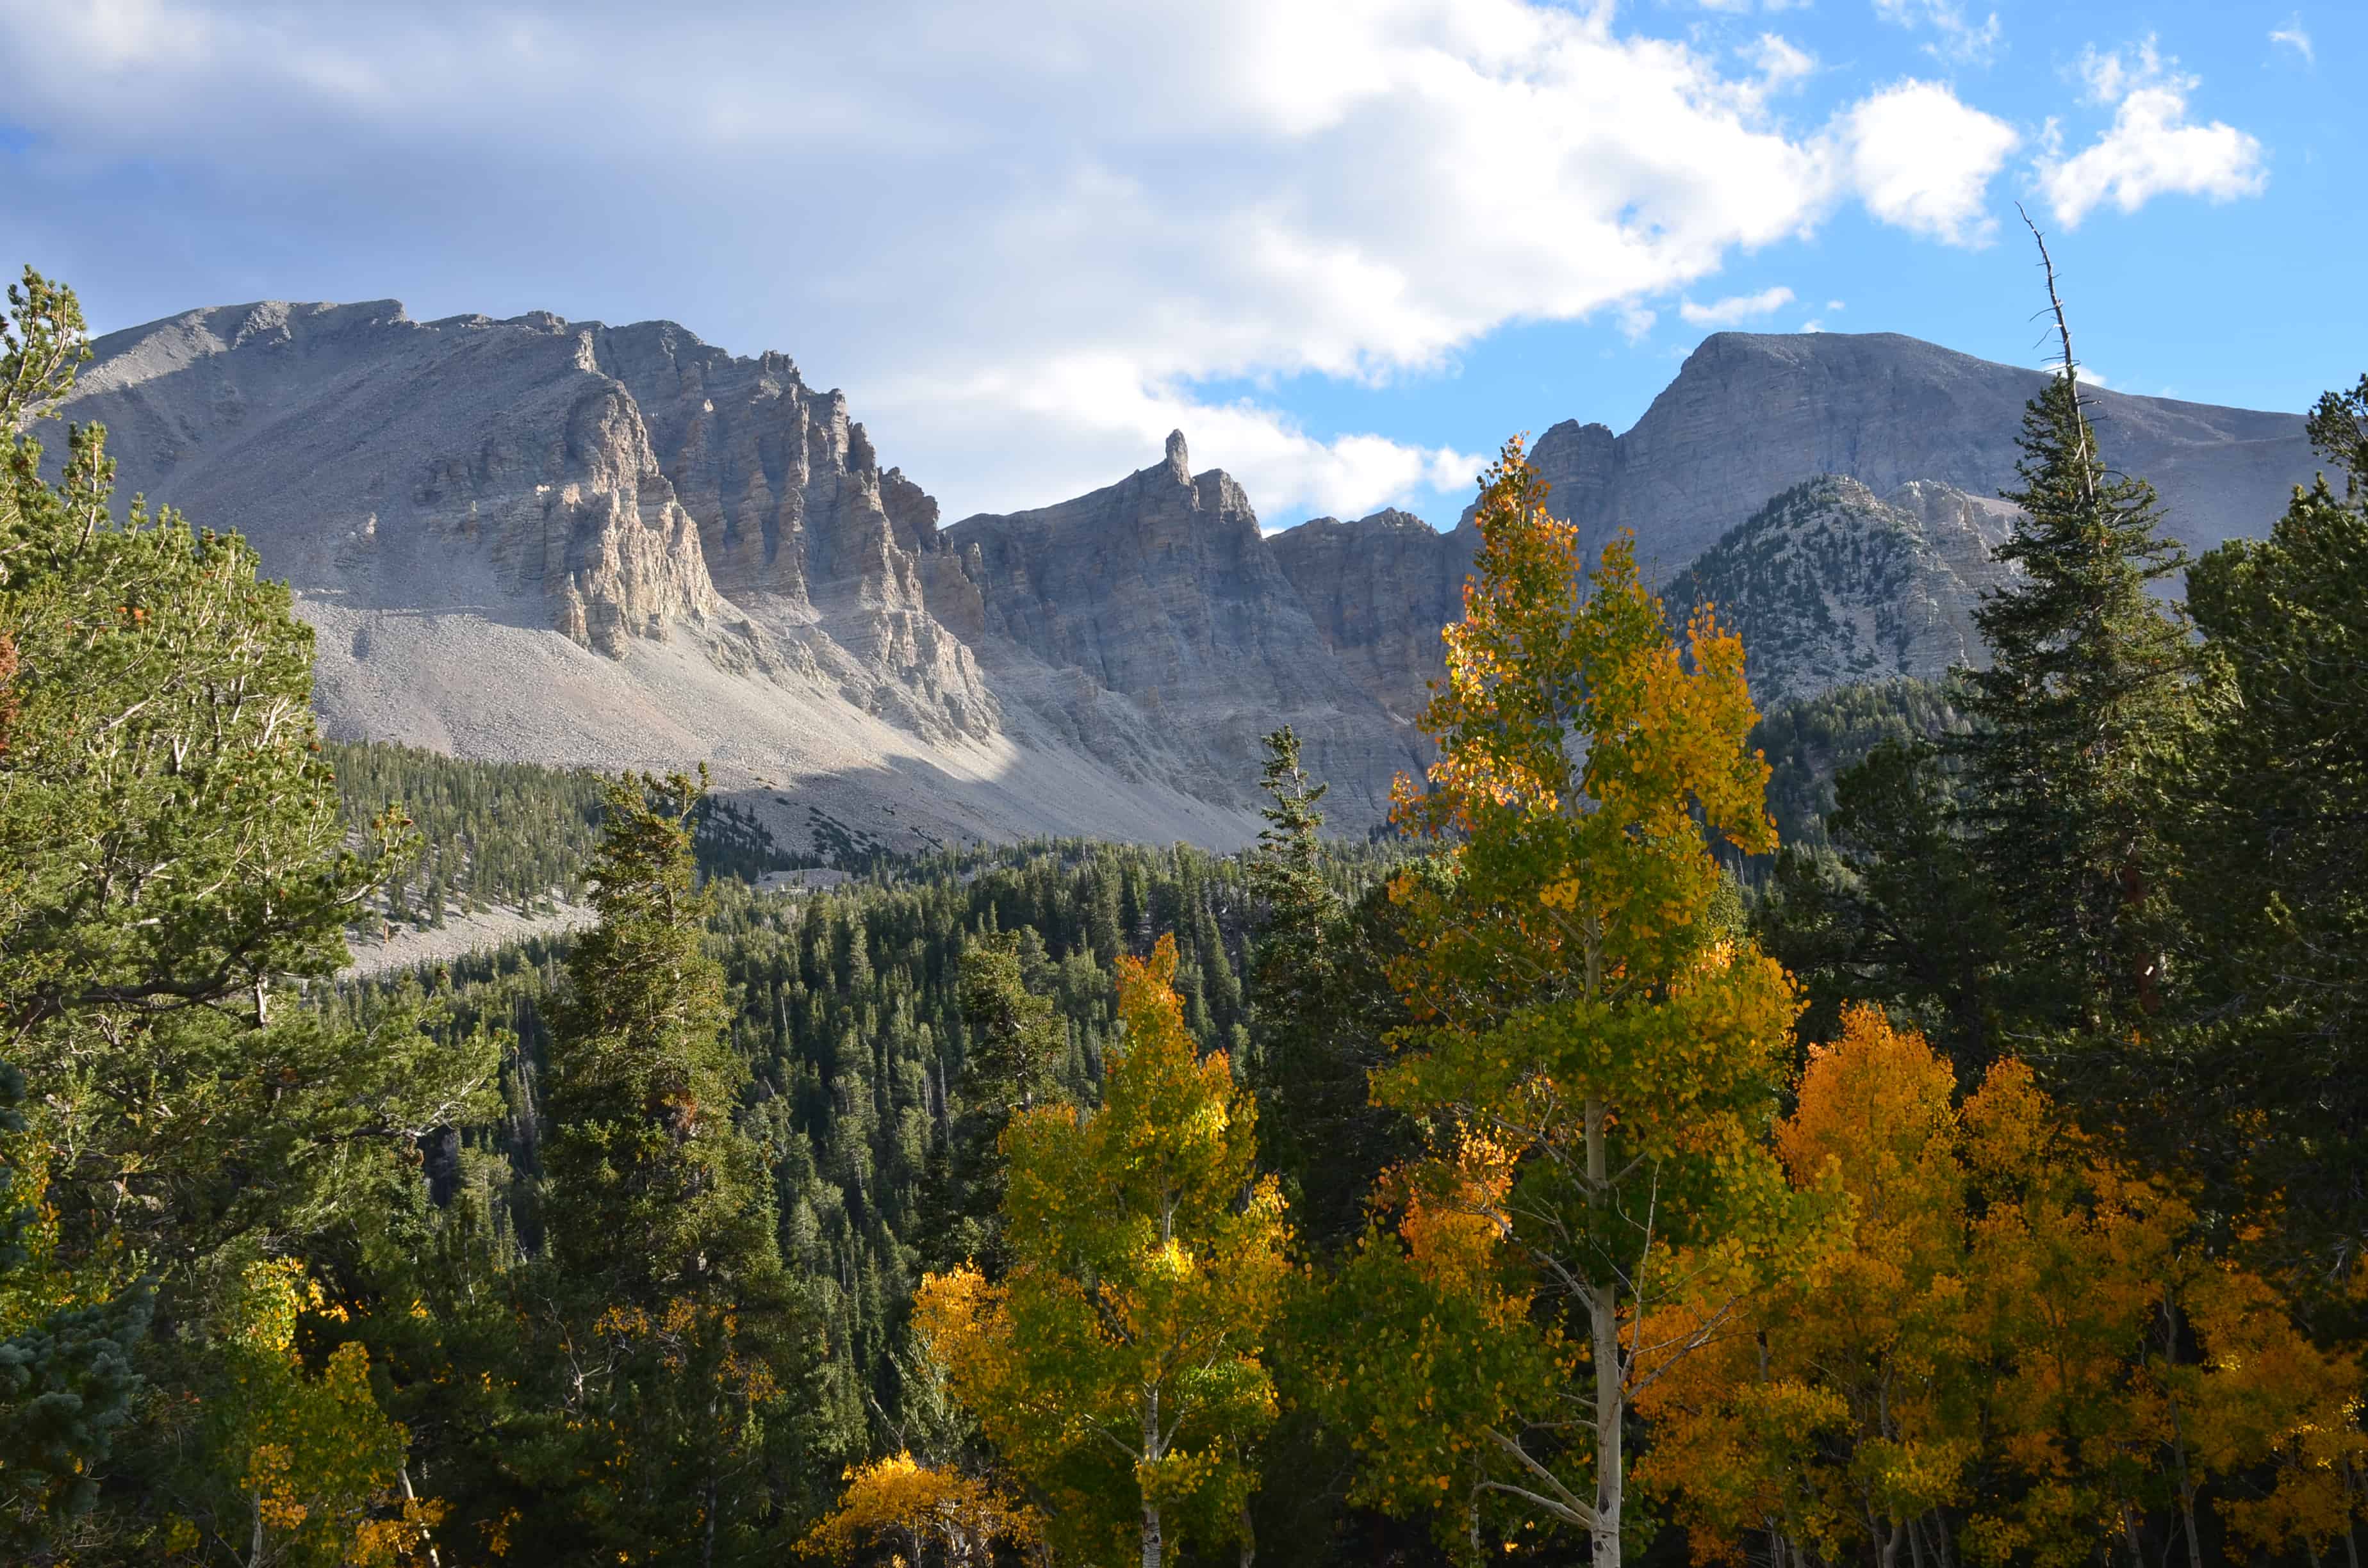 The view from Wheeler Peak Campground at Great Basin National Park in Nevada